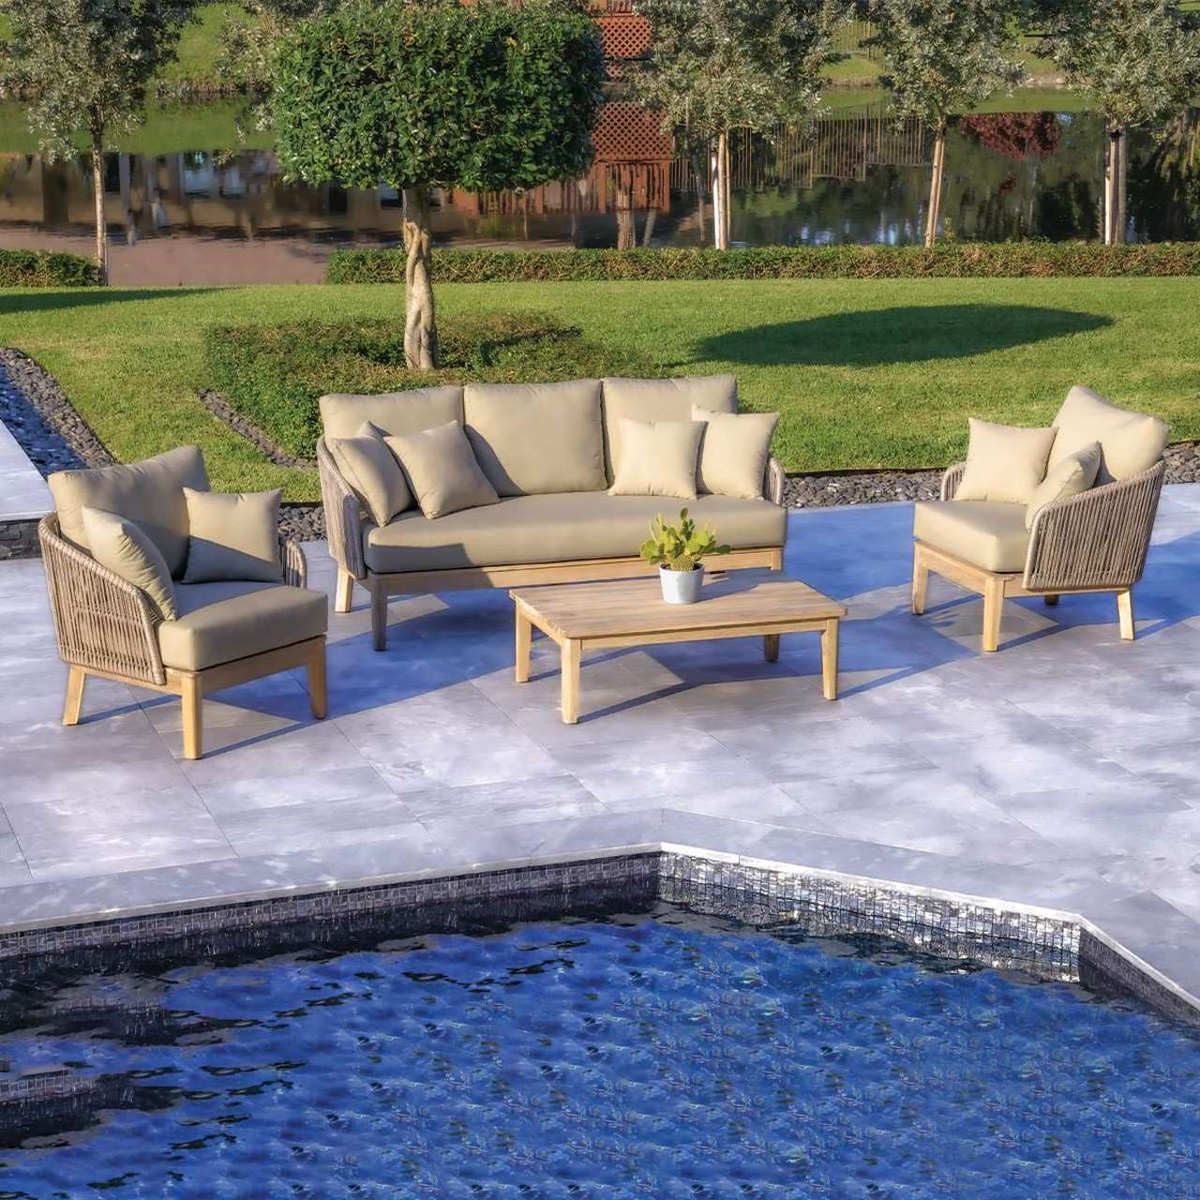 OUTSY Lana 4-Piece Outdoor Wicker Furniture Set in Brown with Wicker Coffee Table